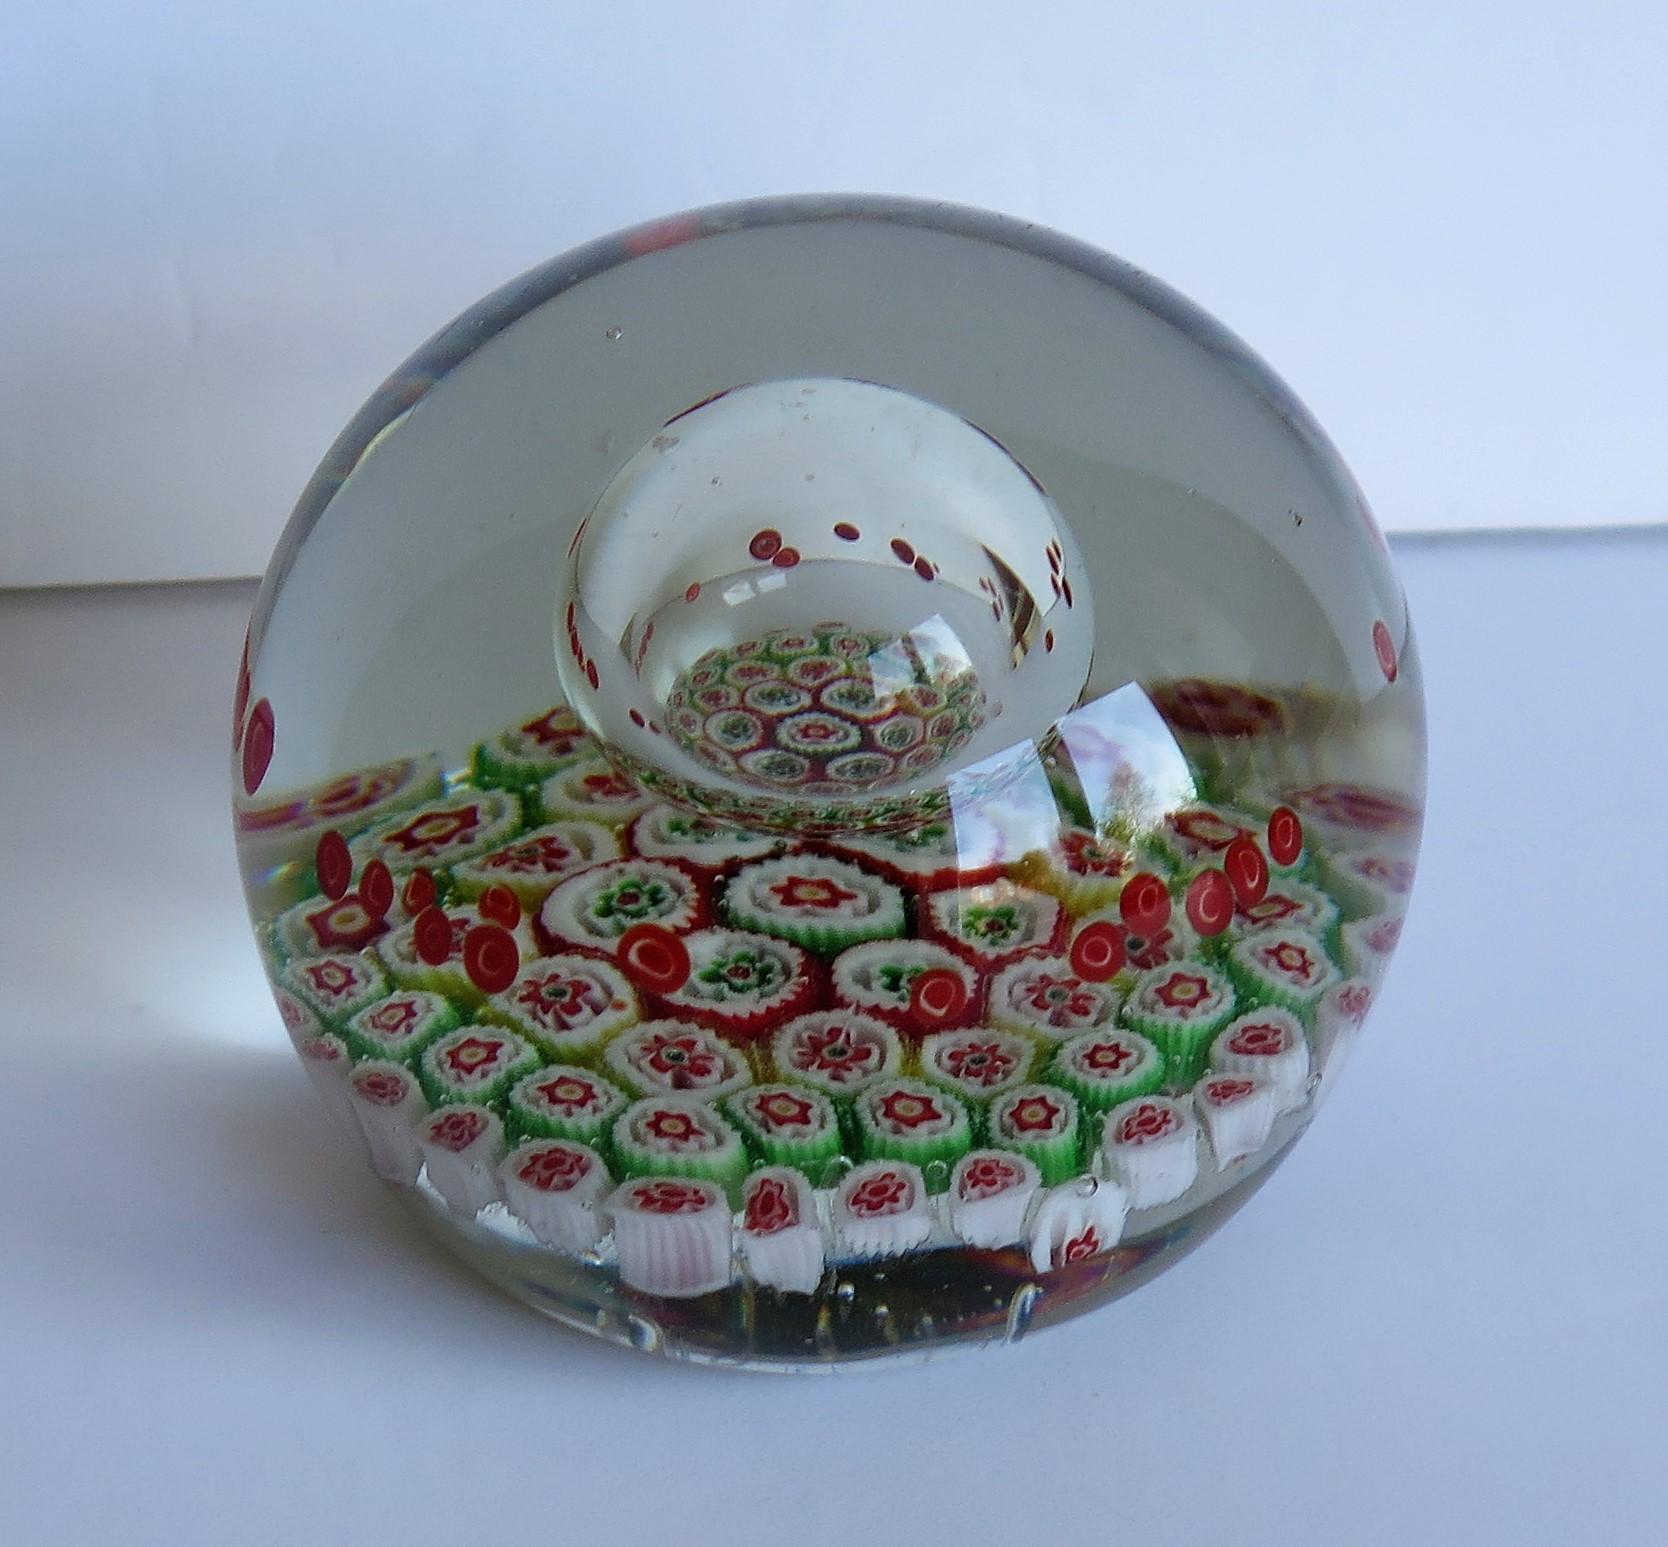 This is a beautiful handmade Millefiori Paperweight with a suspended domed bubble within it which we date to Circa 1900 or possibly earlier. It is heavy with a large diameter of 3.5 inches.

This paperweight is very well made with a Millefiori